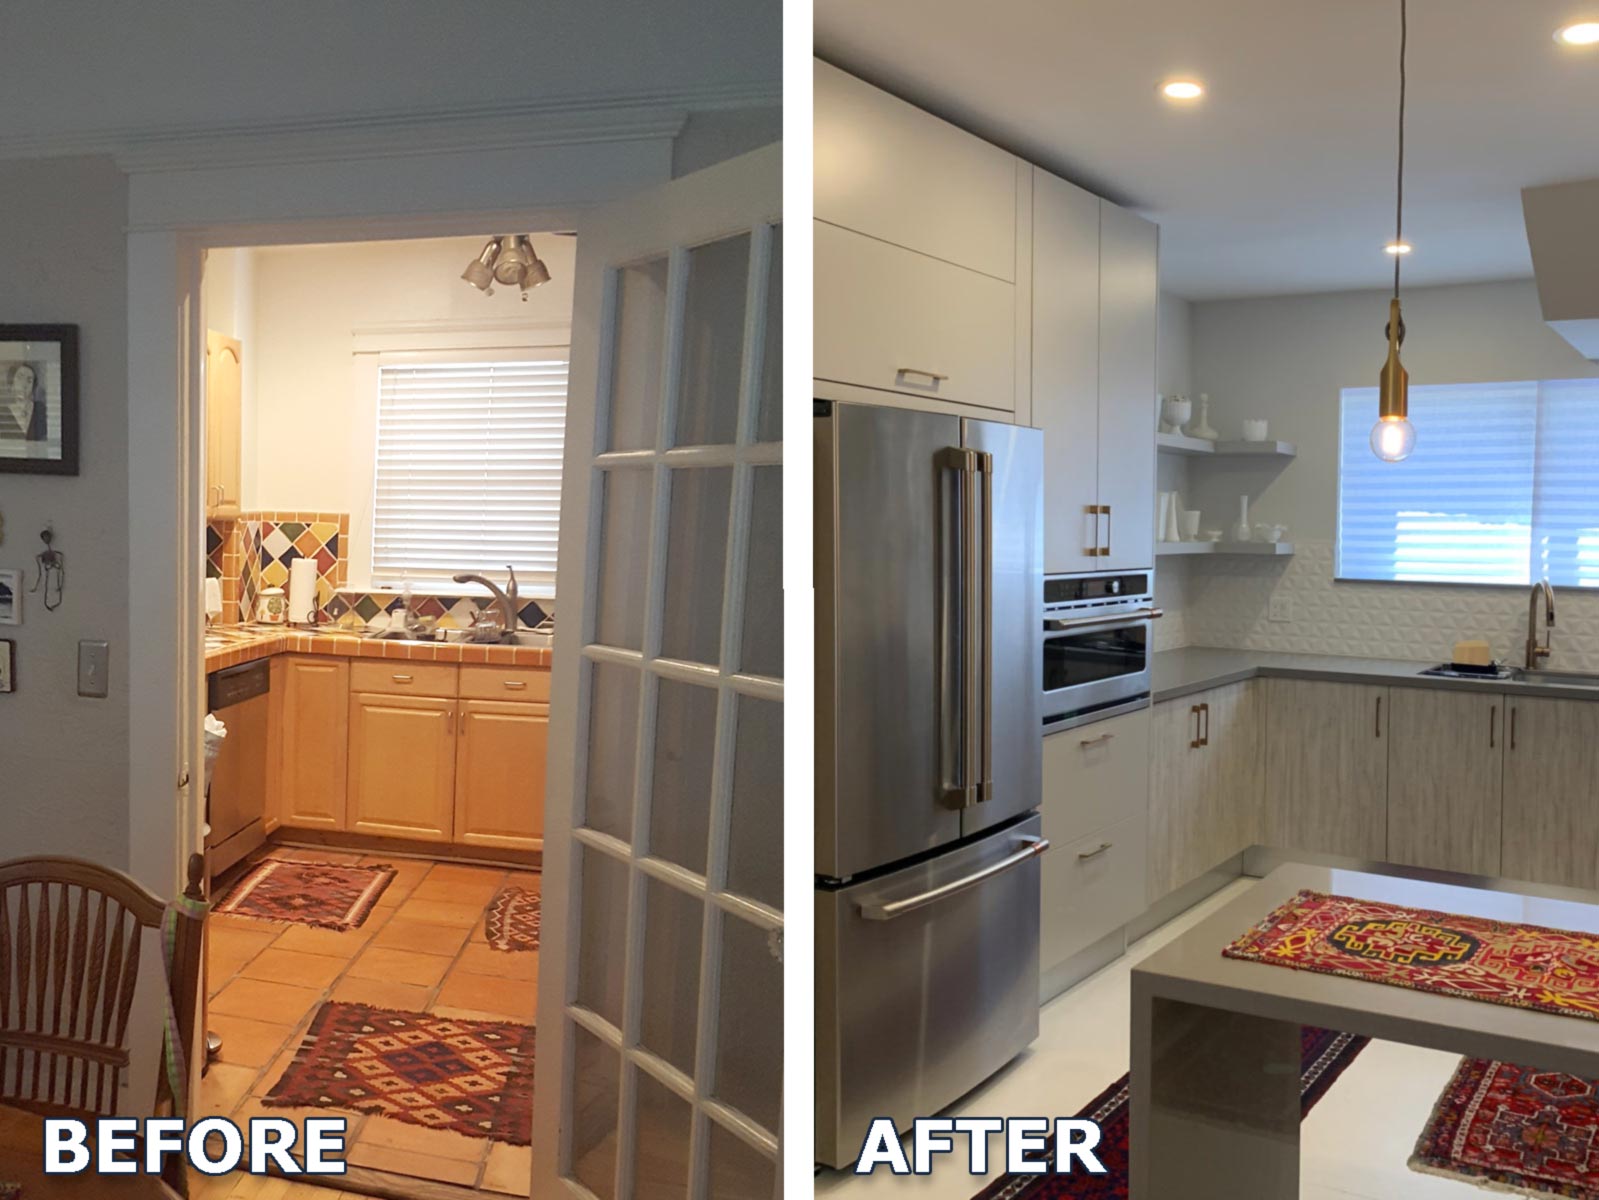 Side-by-side before and after comparison of kitchen remodel